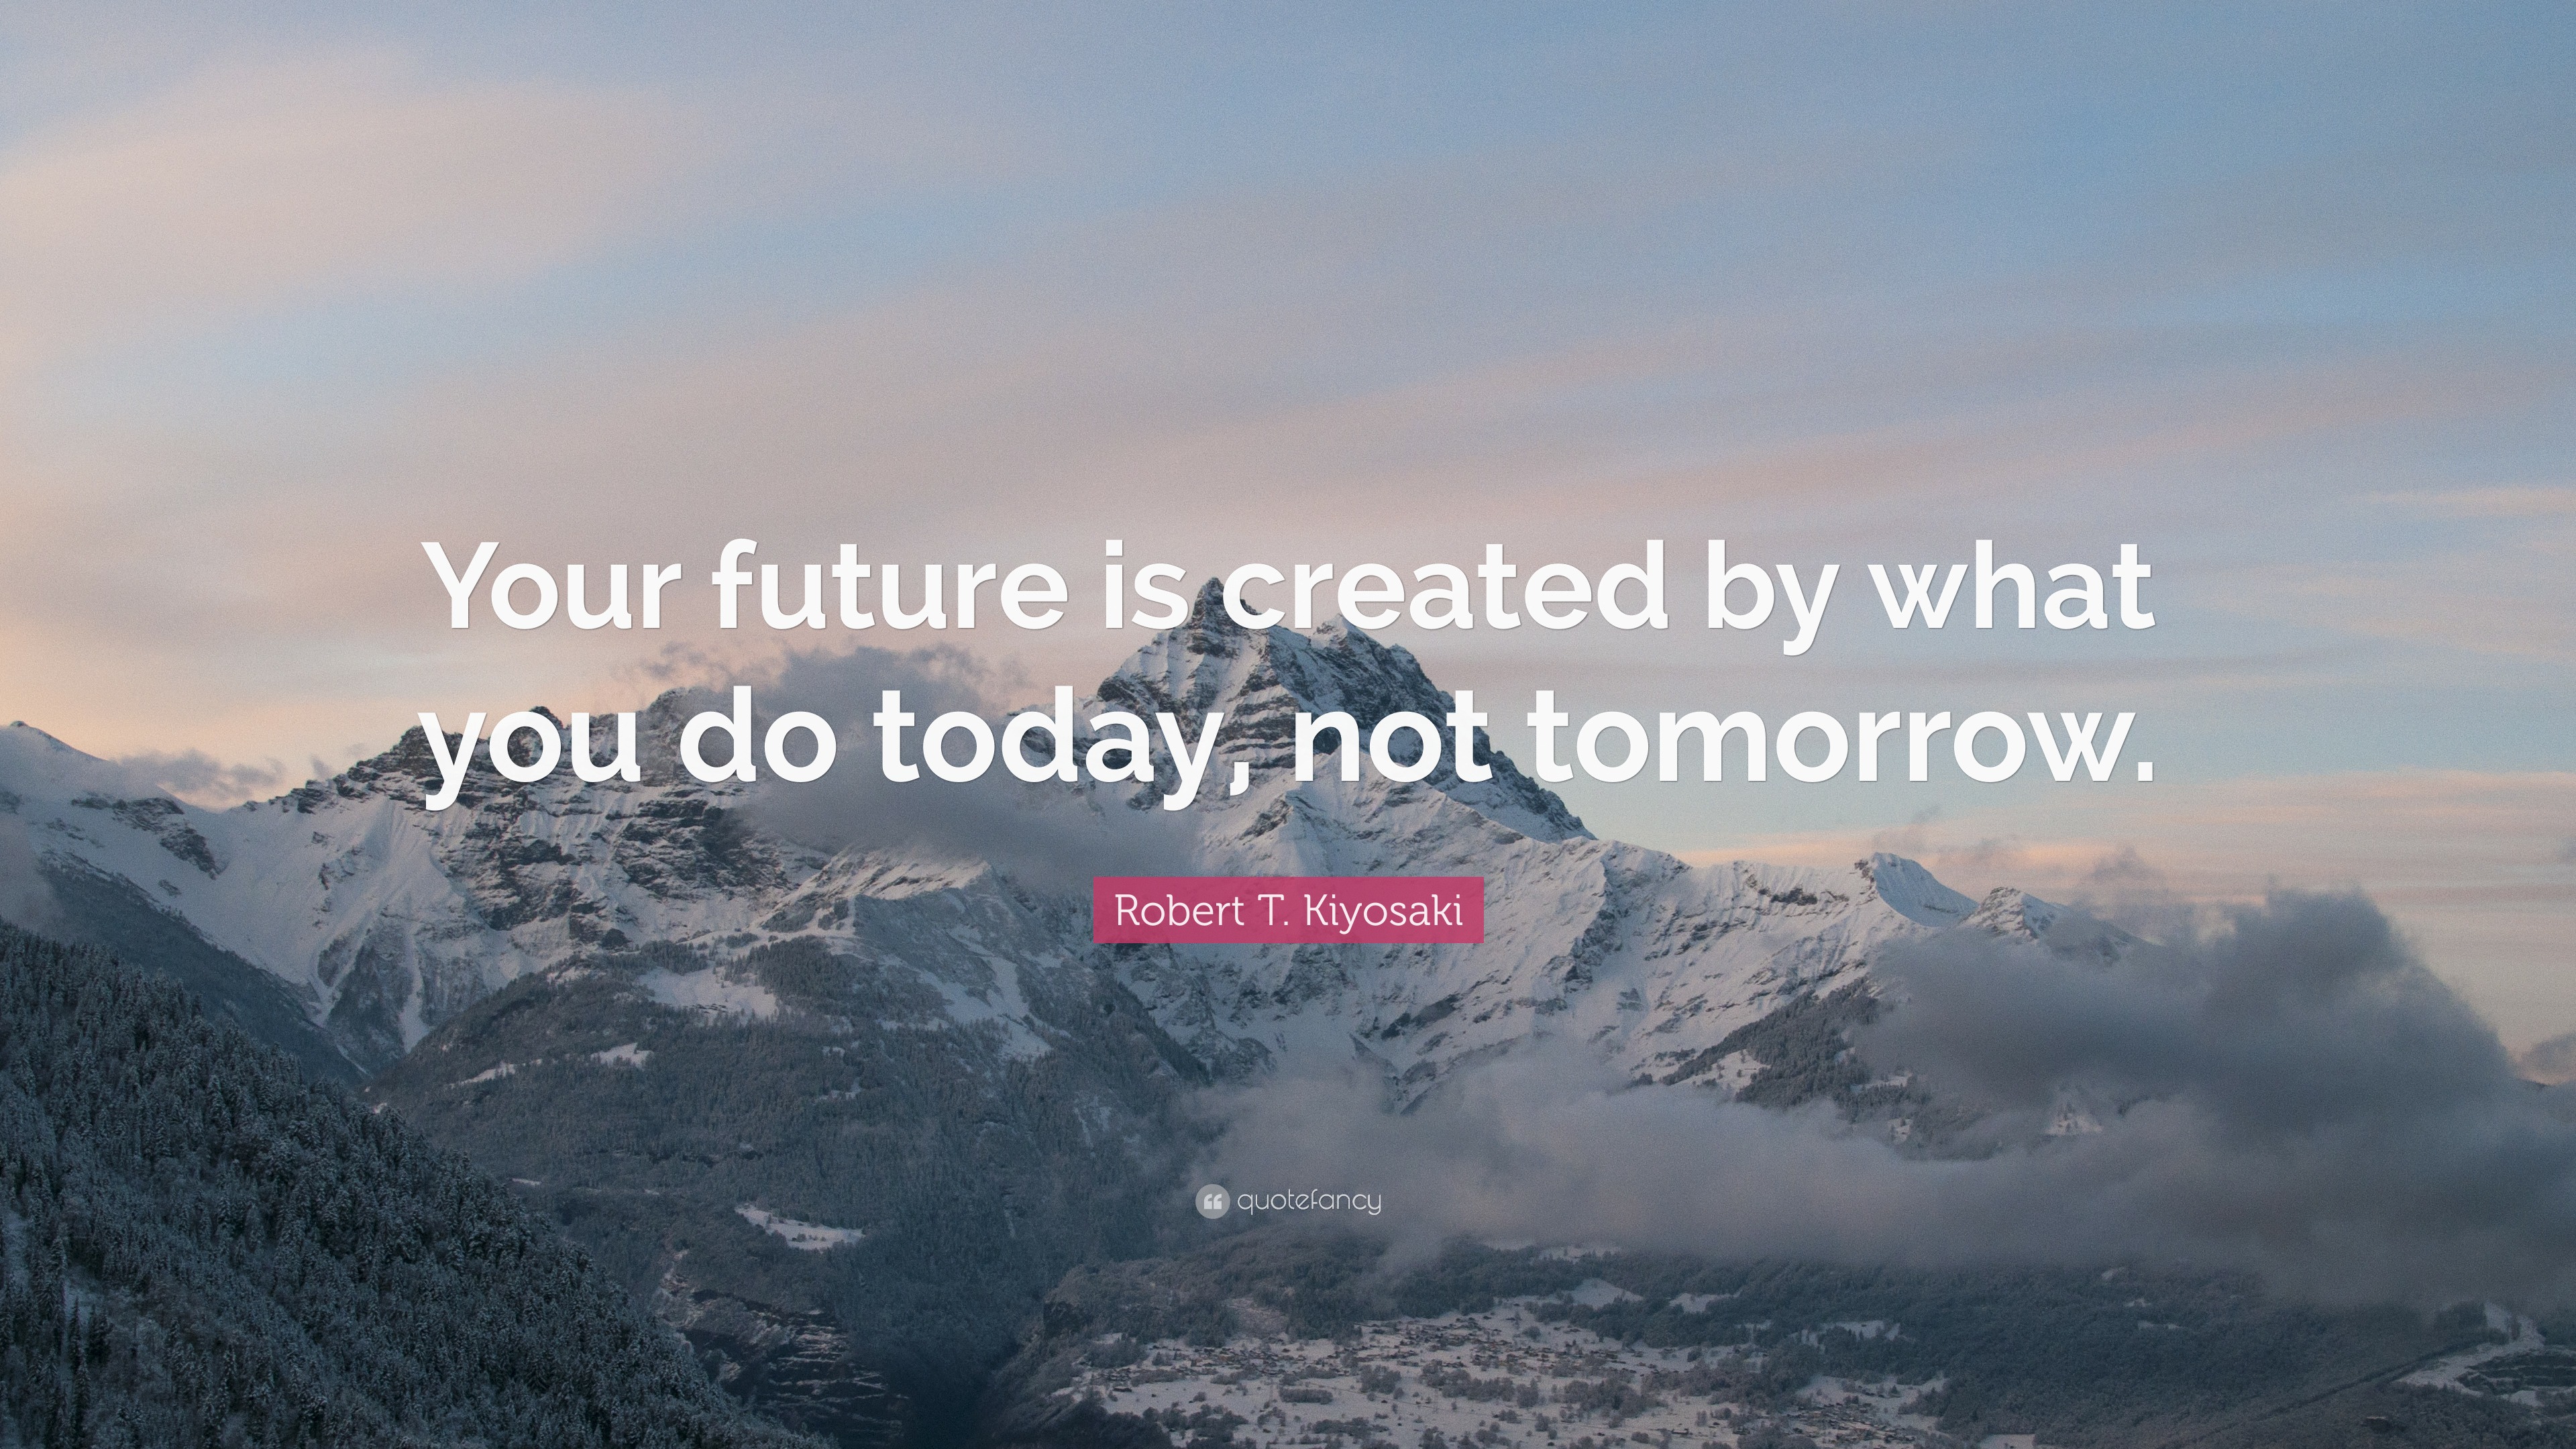 Robert T. Kiyosaki Quote: “Your future is created by what you do today ...